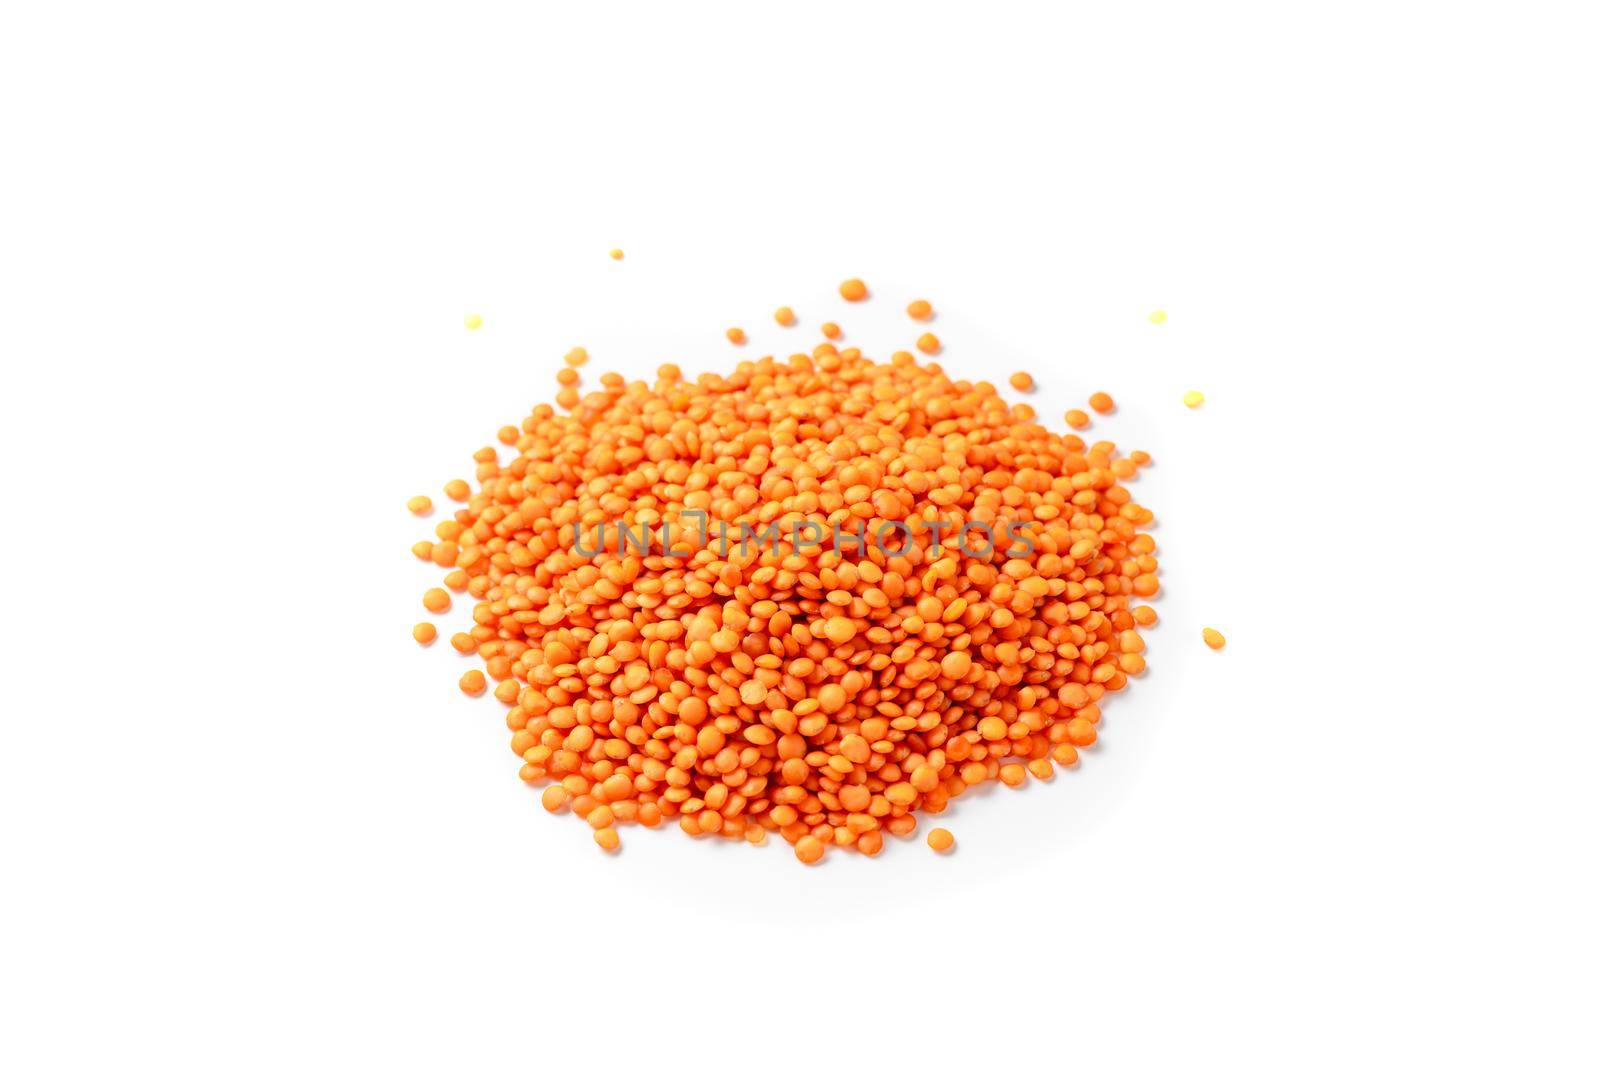 Dry red lentils on a white background isolate. Red lentil grits. Red lentils pile isolated. Dry orange lentil grains, heap of dal, raw daal, dhal, masoor, Lens culinaris or Lens esculenta on white background